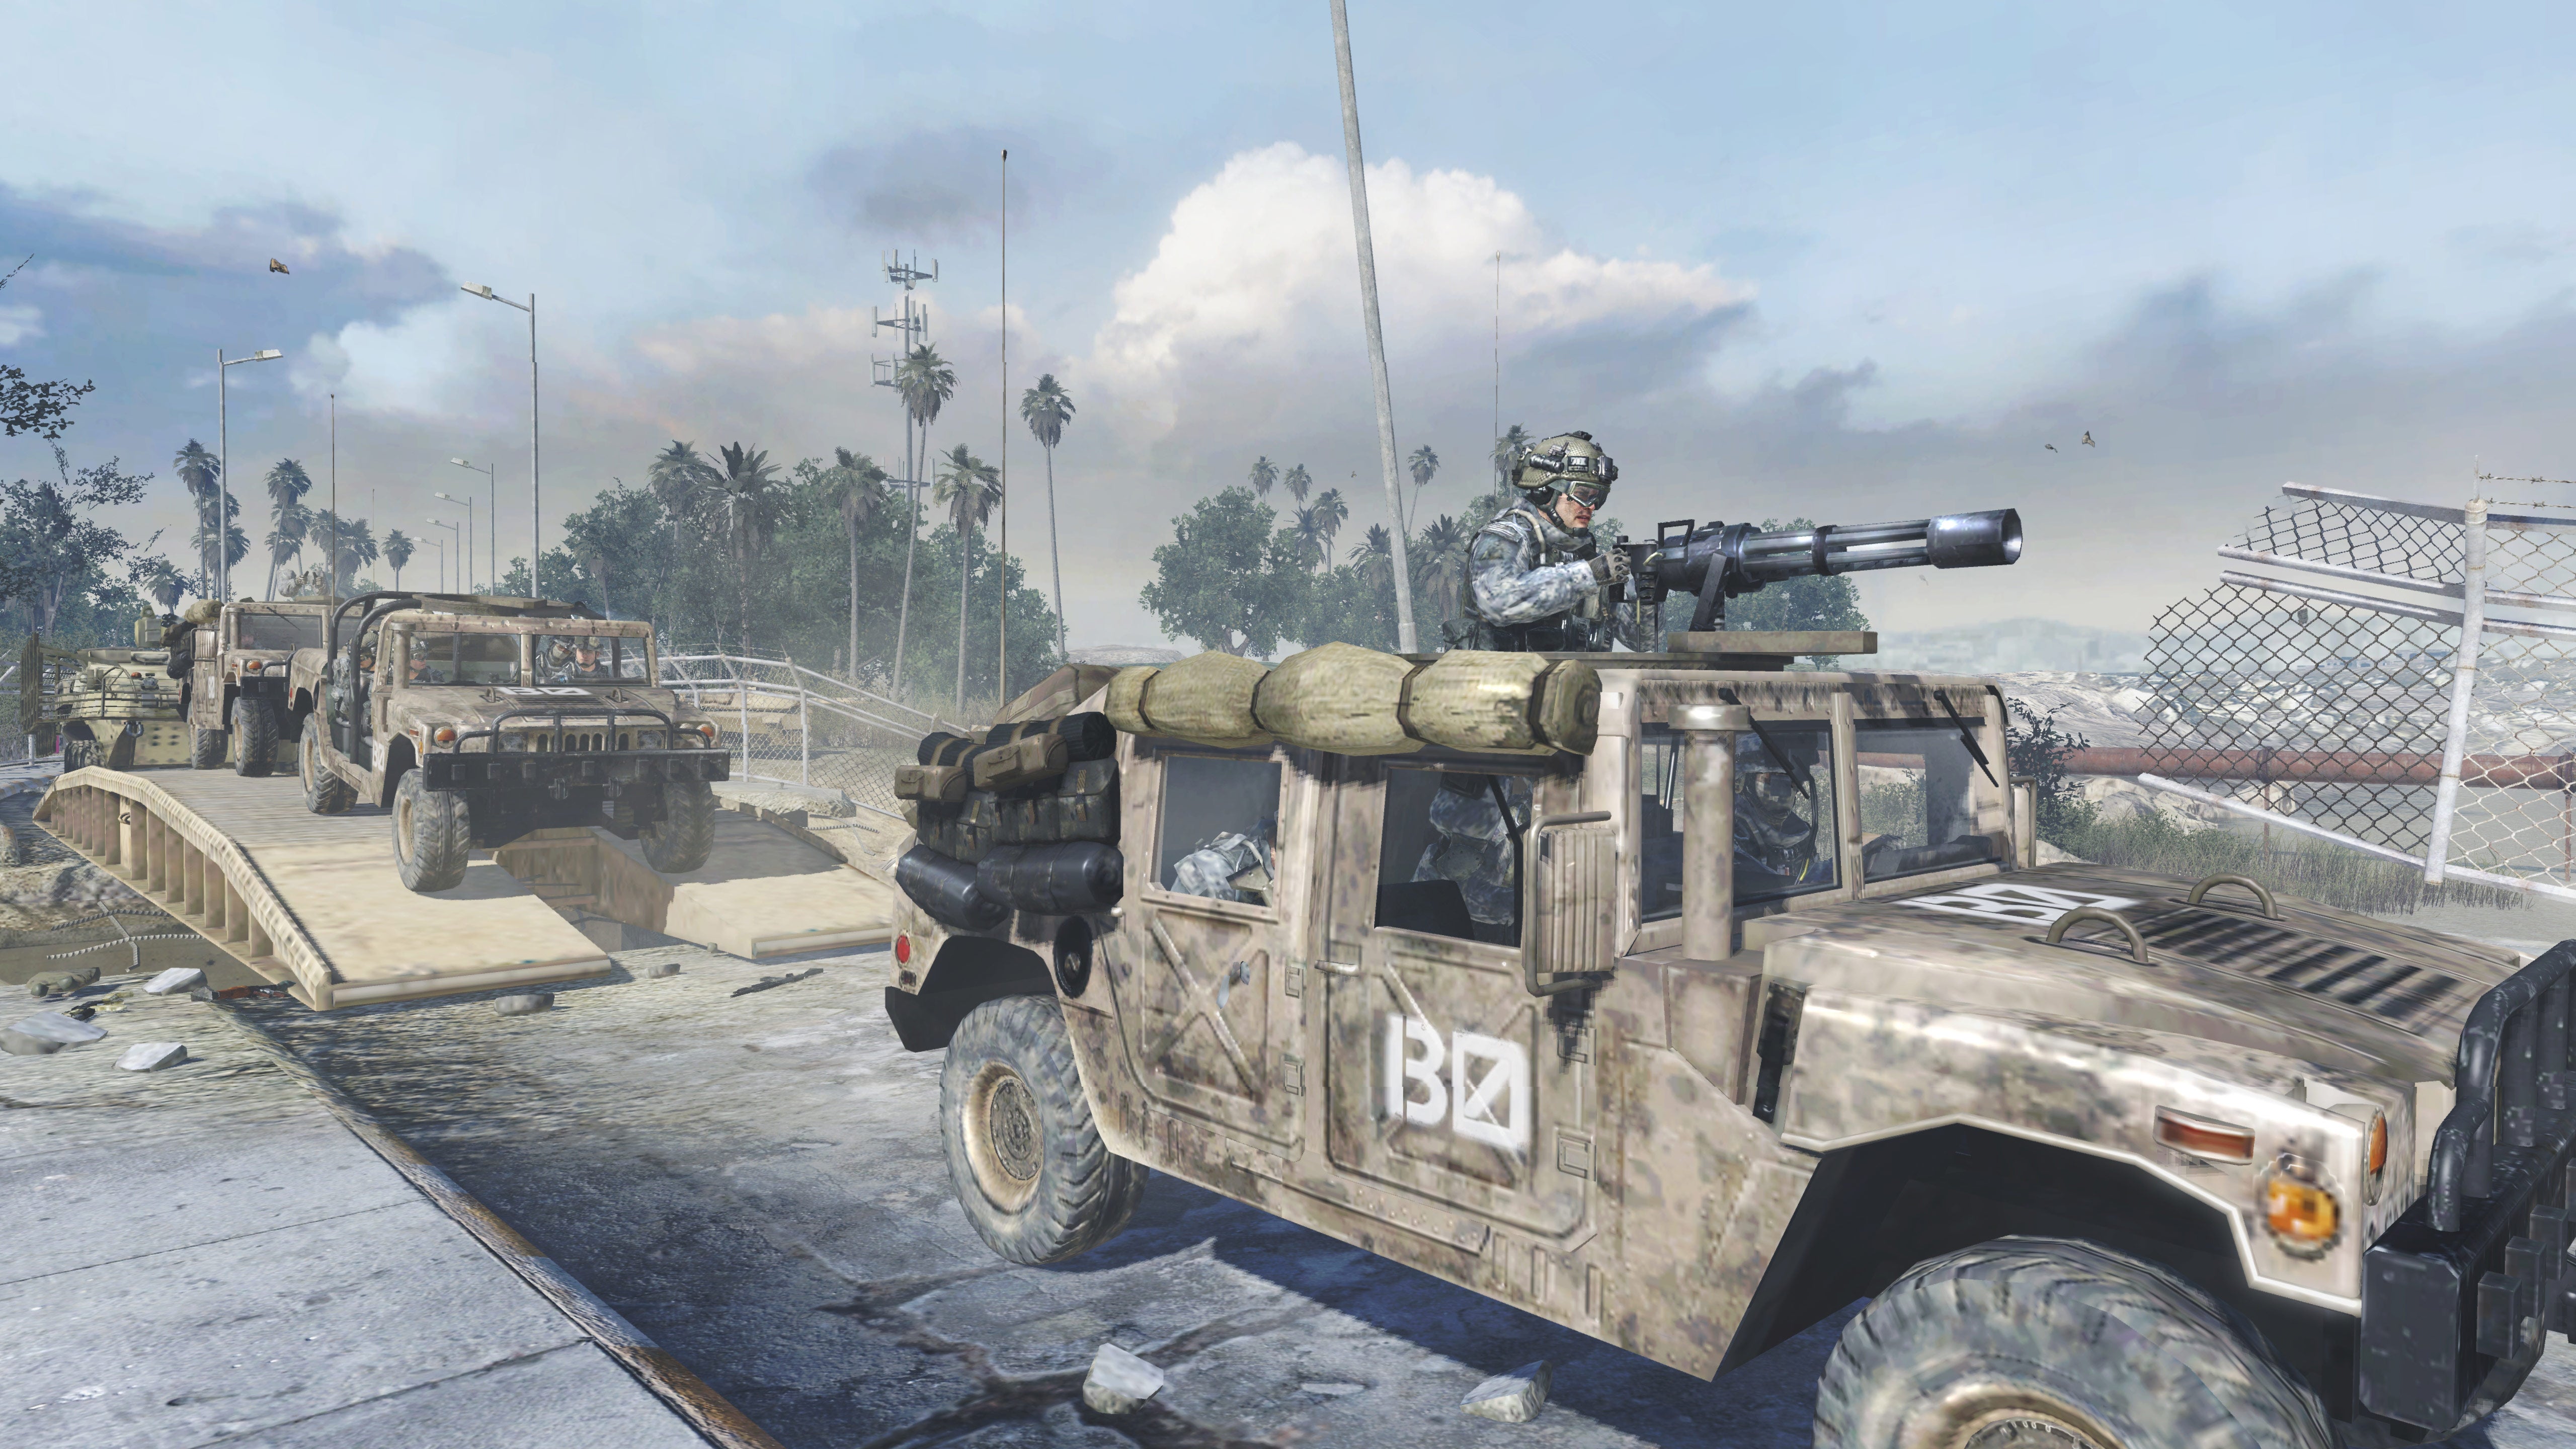 Activision Says A Call Of Duty Lawsuit Is “A Direct Attack On The First Amendment”